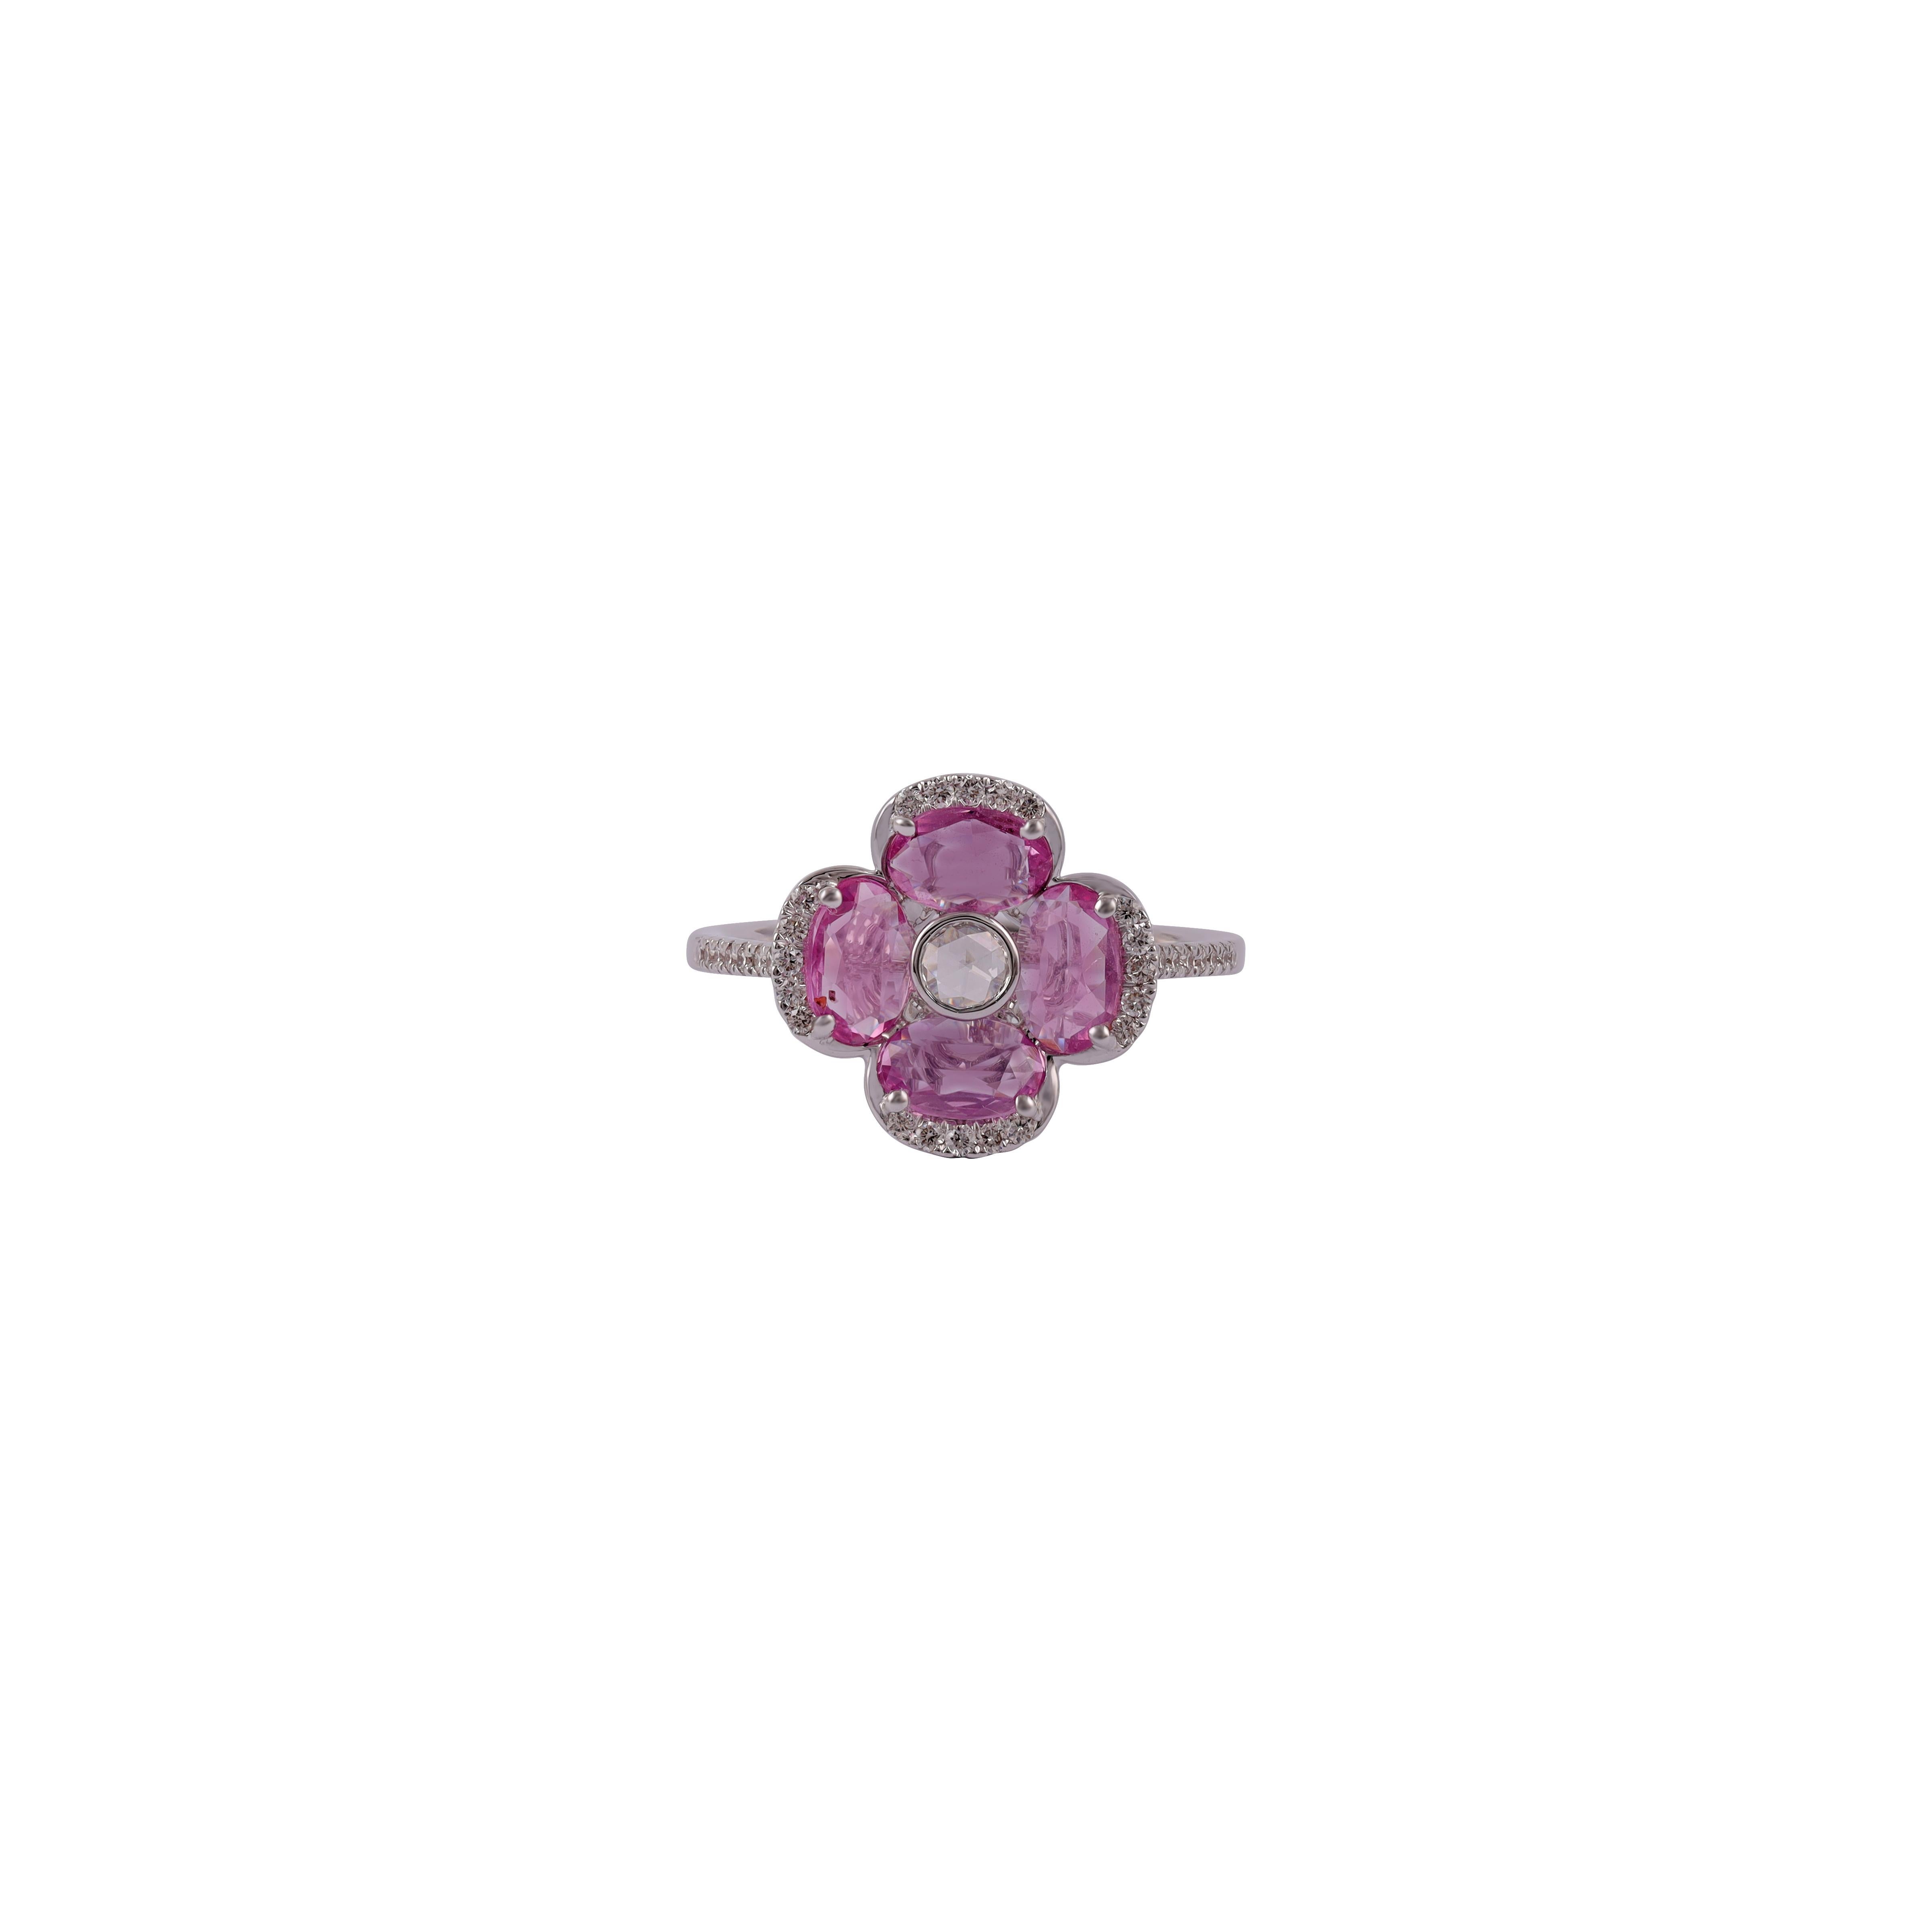 Rose cut Diamond surrounded by Oval Pink Sapphire Flower Ring
1 Rose cut  Diamond - 0.06 CTS
4 Oval Pink Sapphire - 1.34 CTS
36 Round Brilliant Cut 0.22 CTS
18 Karat White Gold - 3.22 Grams
